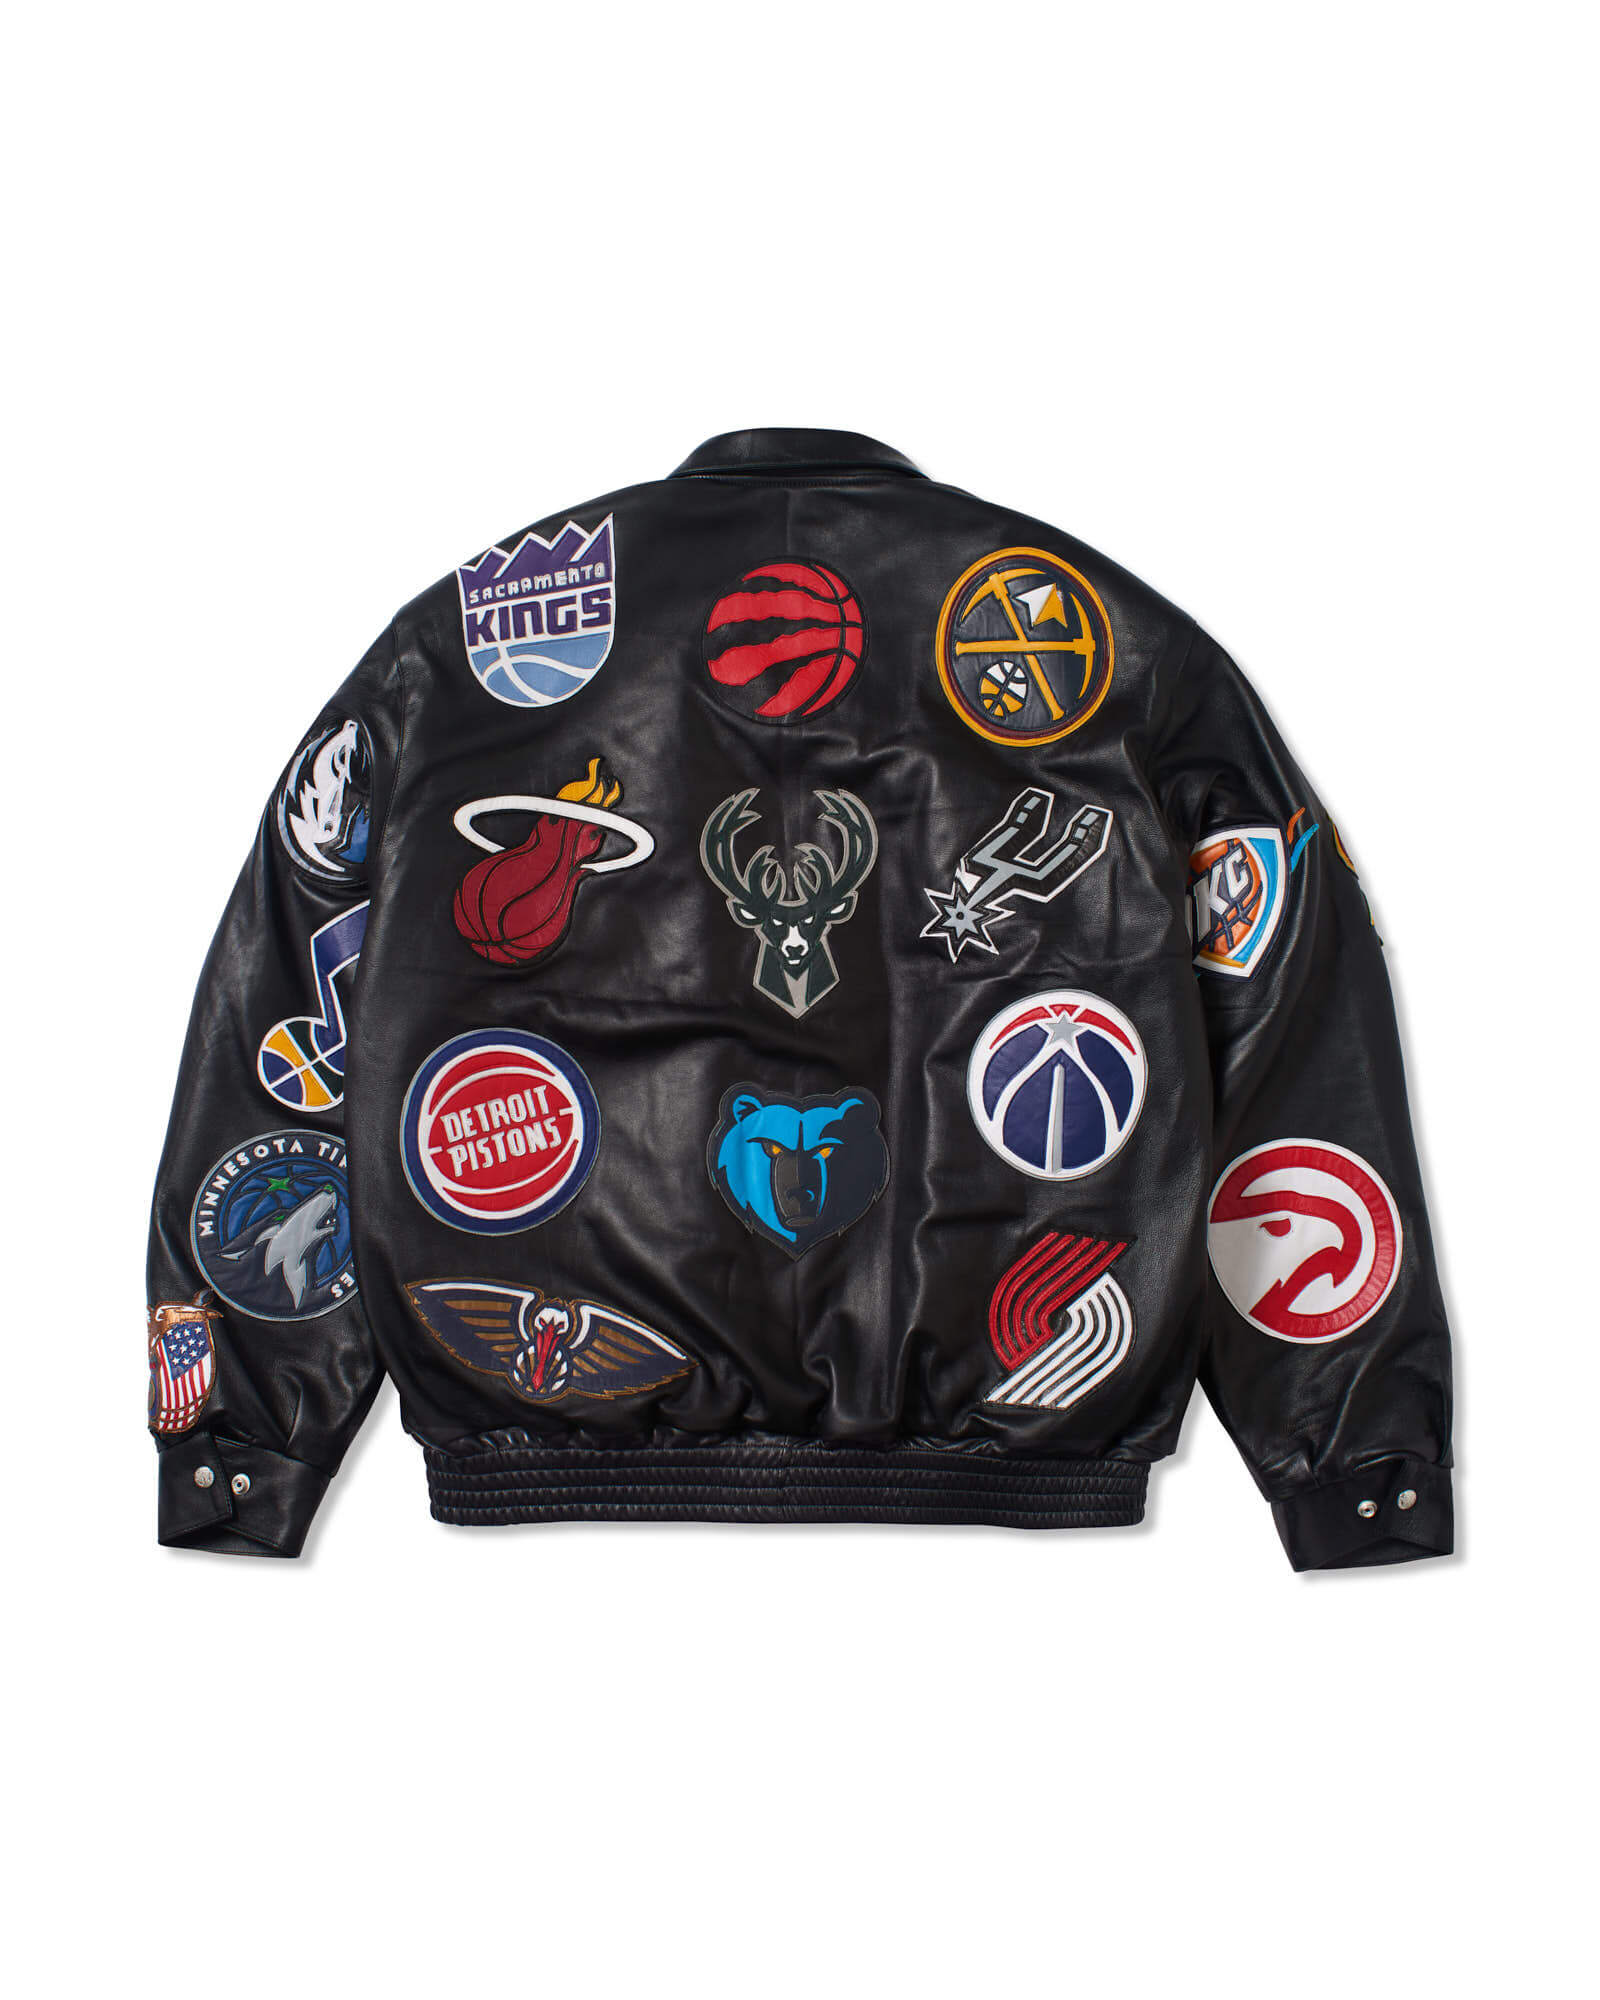 Maker of Jacket Fashion Jackets Red NBA Teams Collage Jeff Hamilton Leather